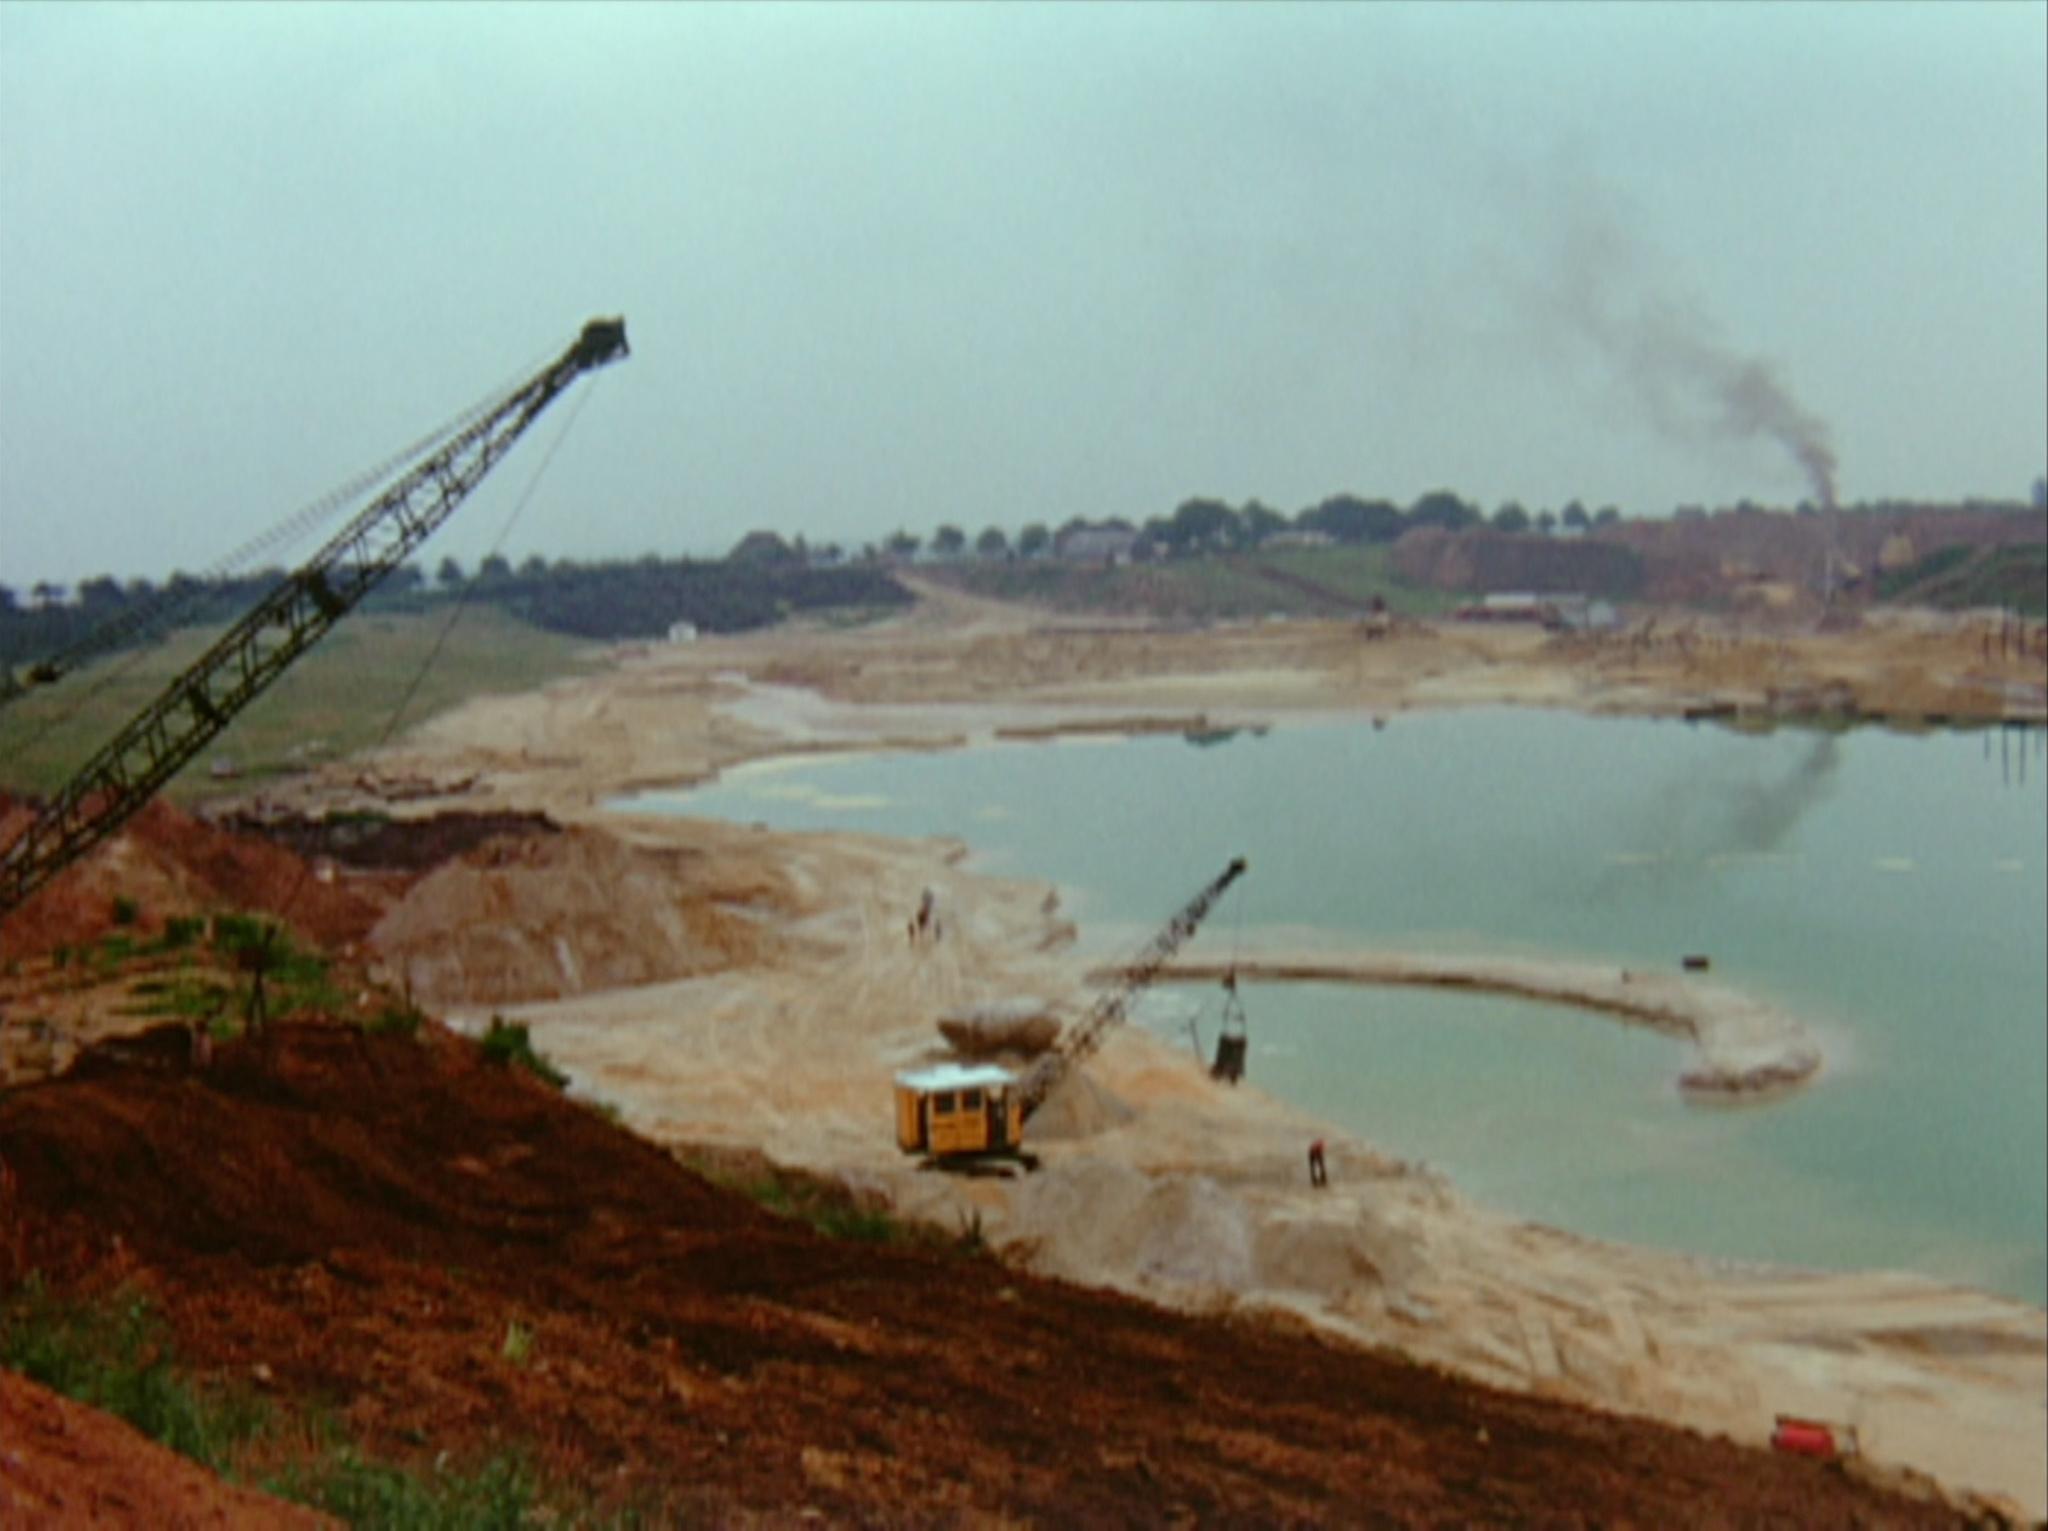 an overview of an active sand quarry